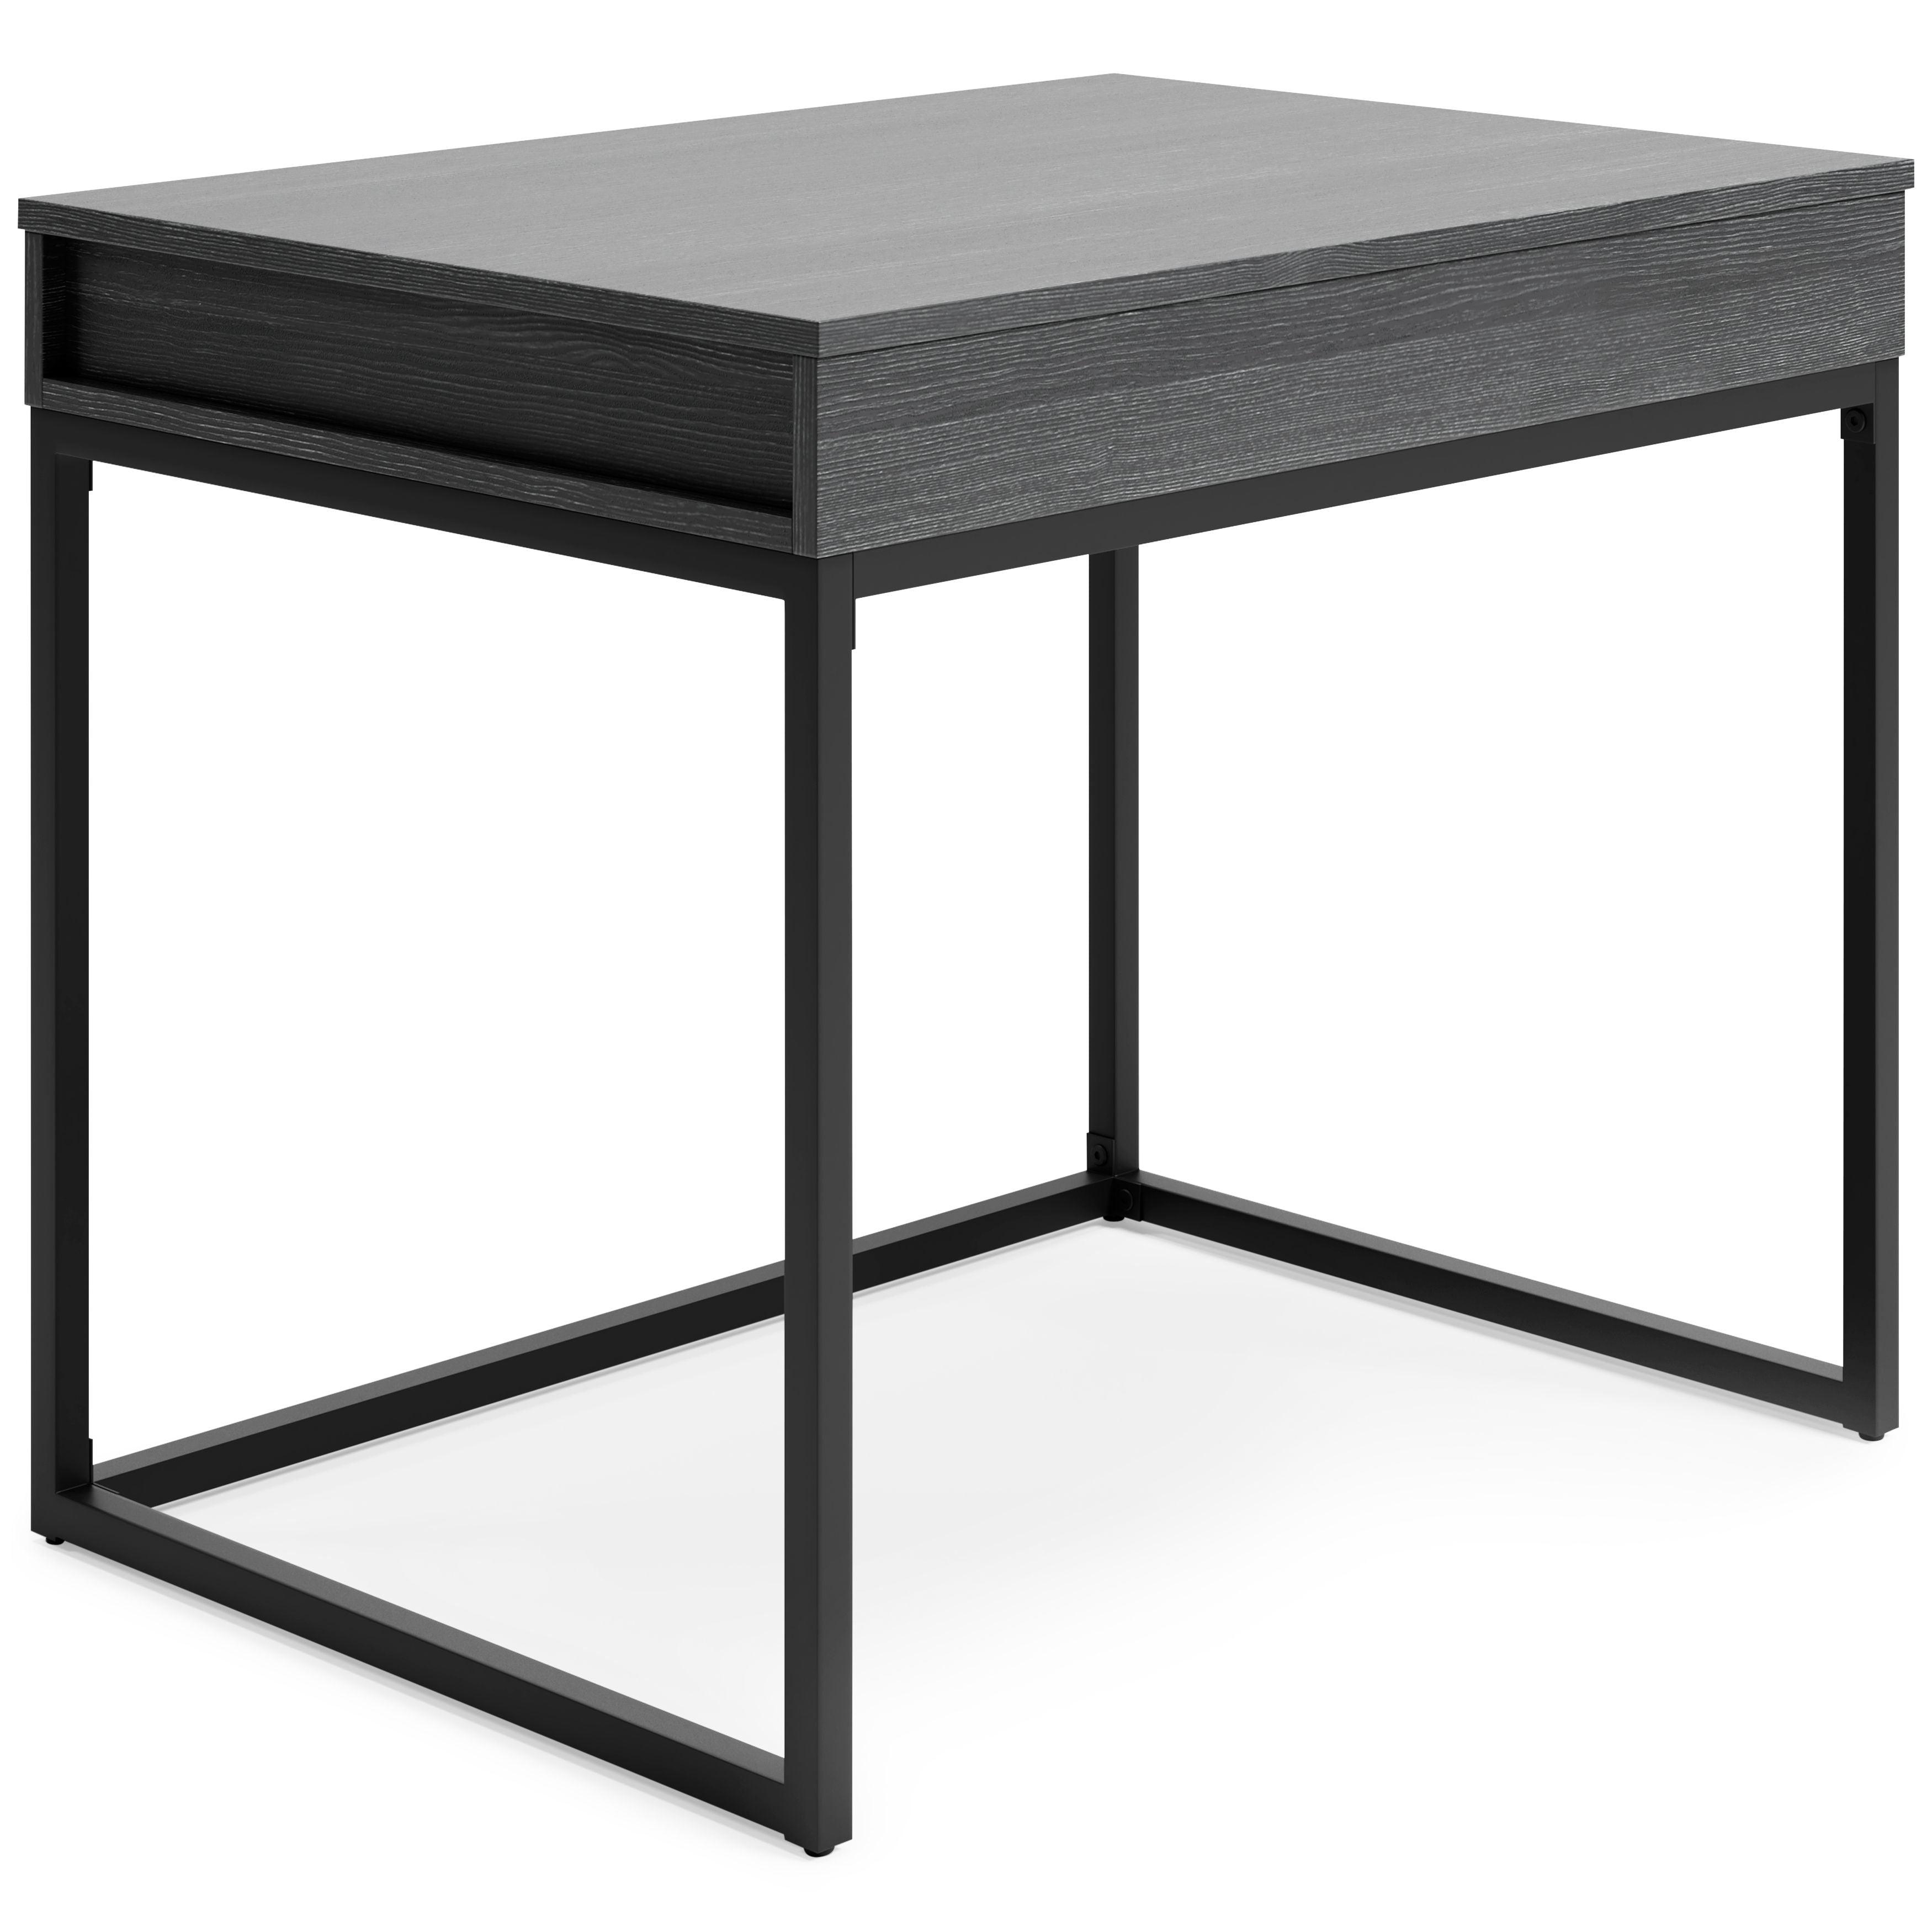 Signature Design by Ashley® - Yarlow - Black - Home Office Lift Top Desk - 5th Avenue Furniture